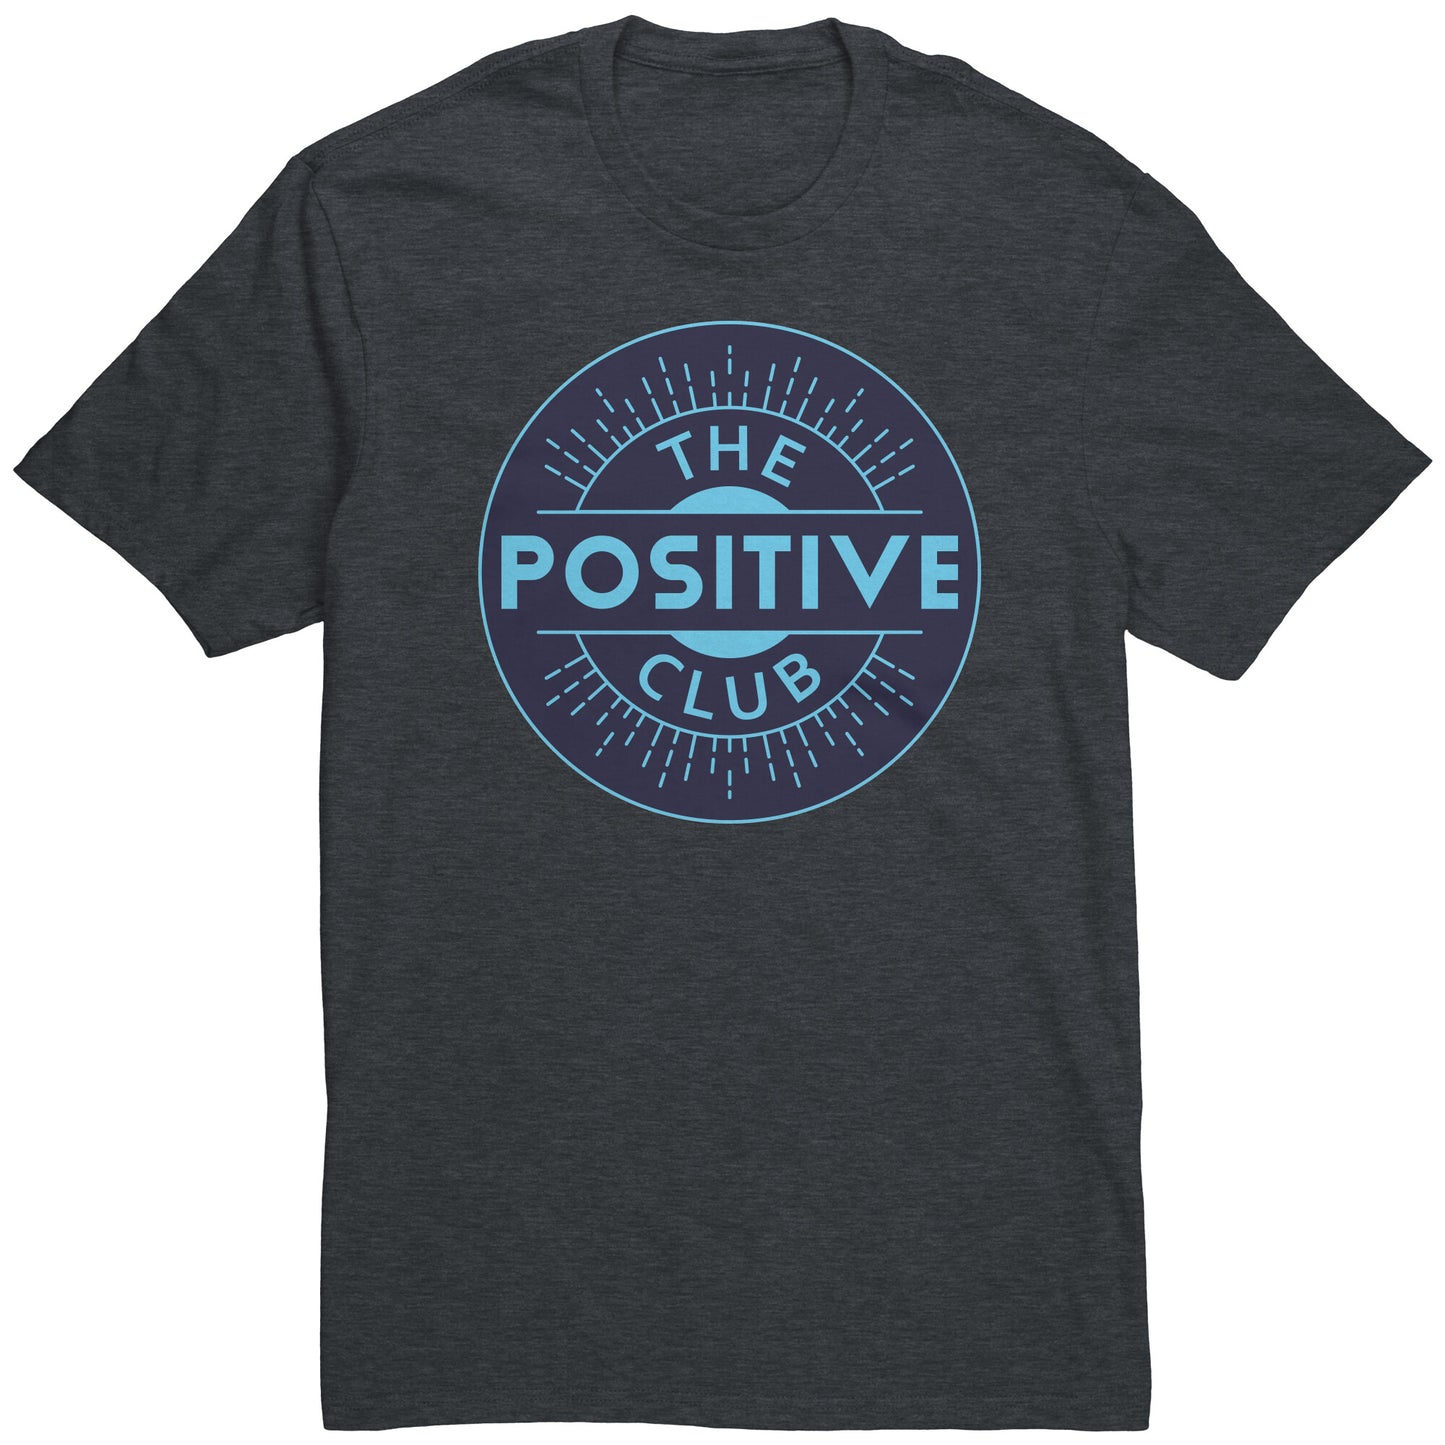 Unisex shirt  The Positive Club ( Free Shipping )